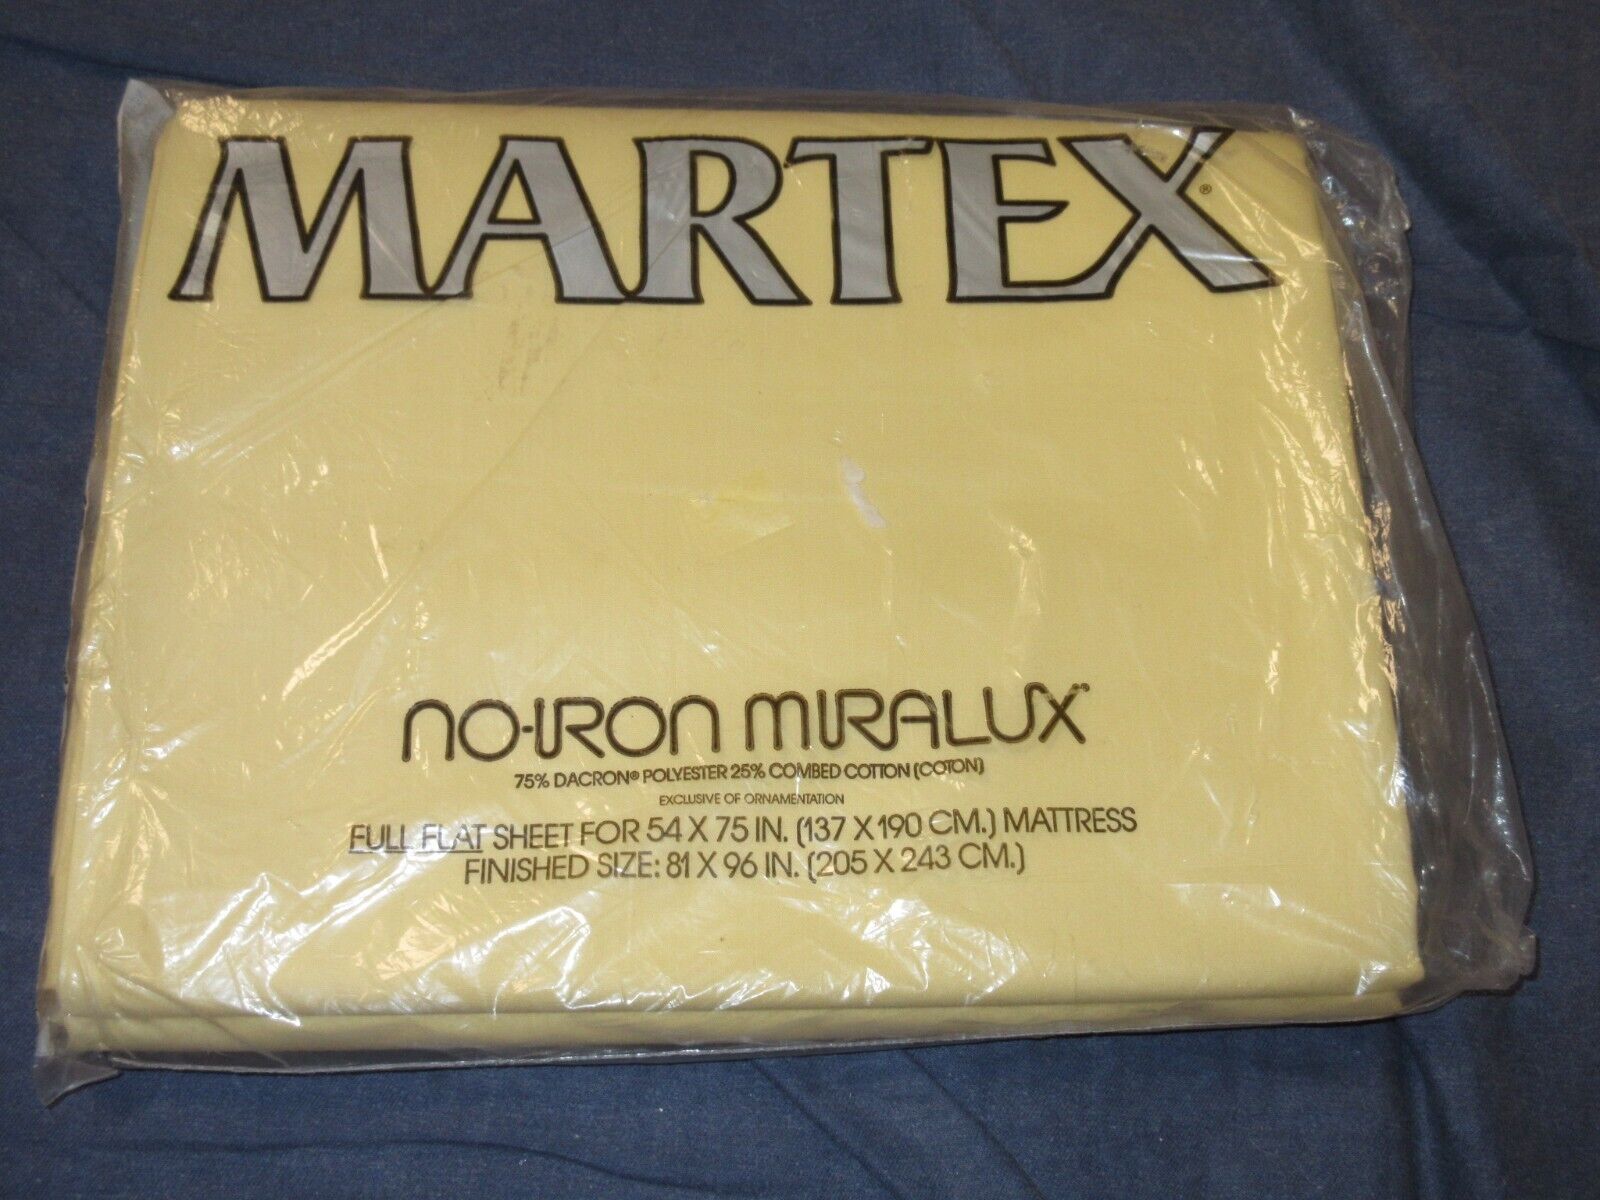 NEW but Vintage Full Double Flat Sheet by MARTEX - Solid Yellow No-Iron Miralux